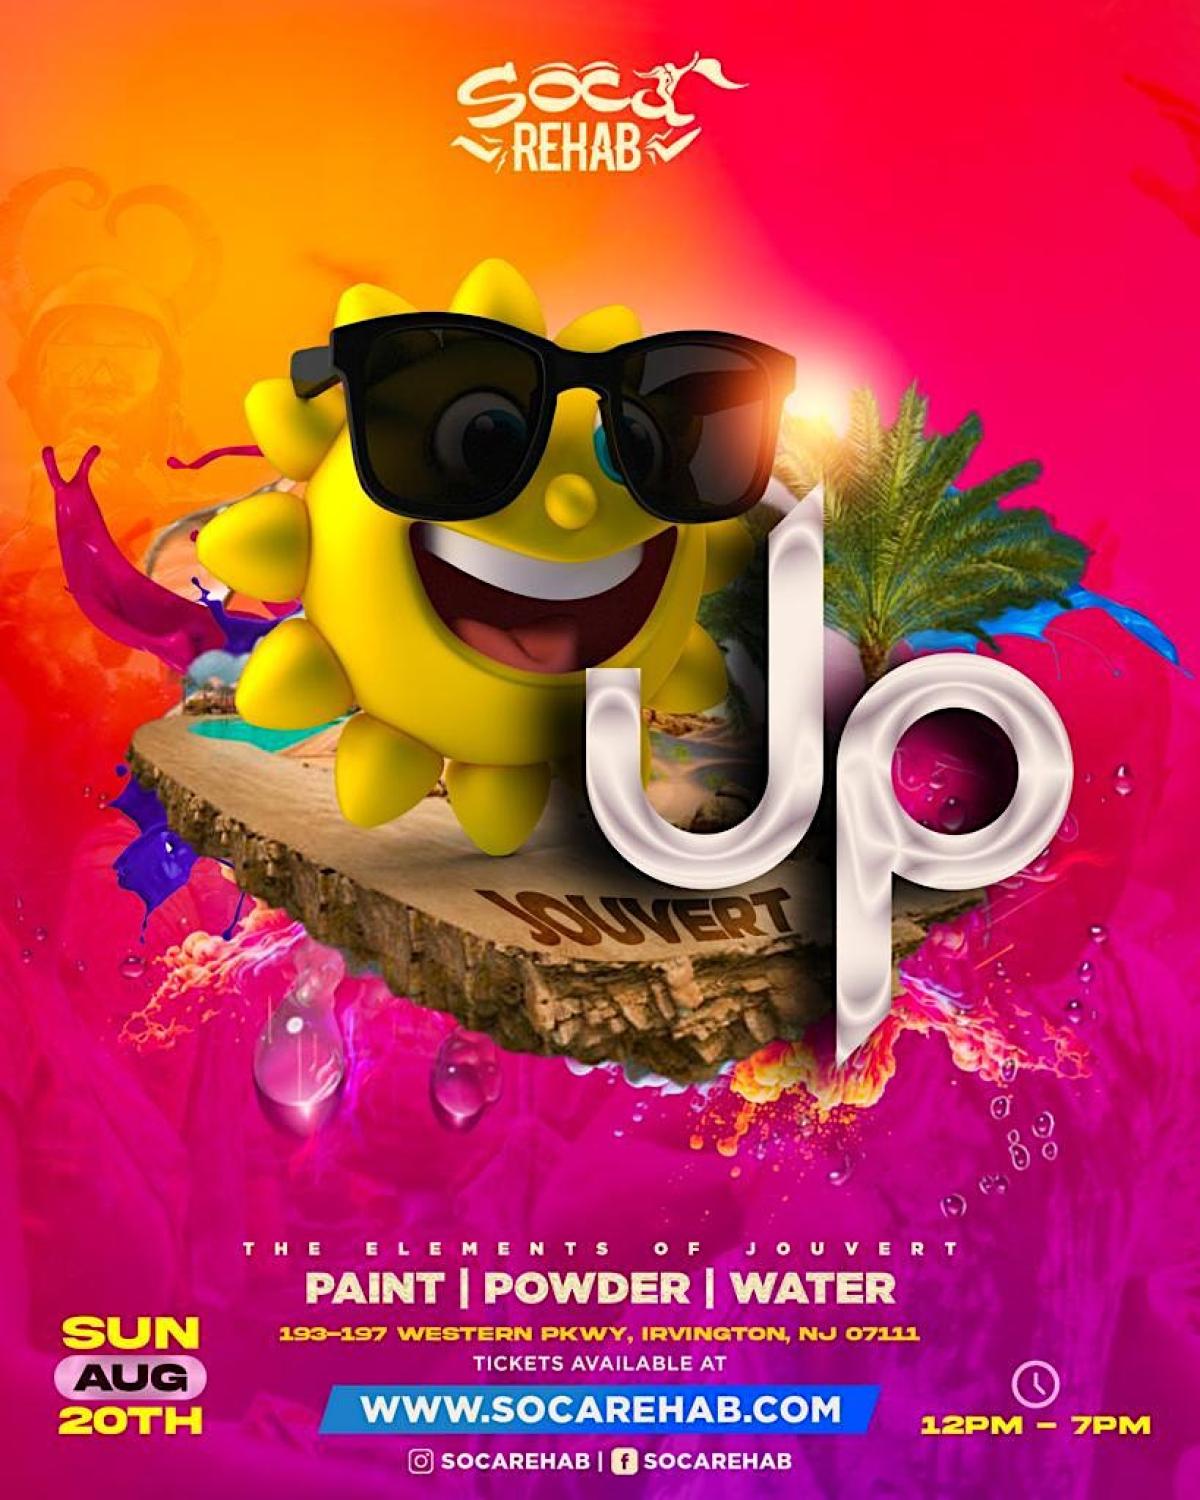 Sun Up Jouvert flyer or graphic.